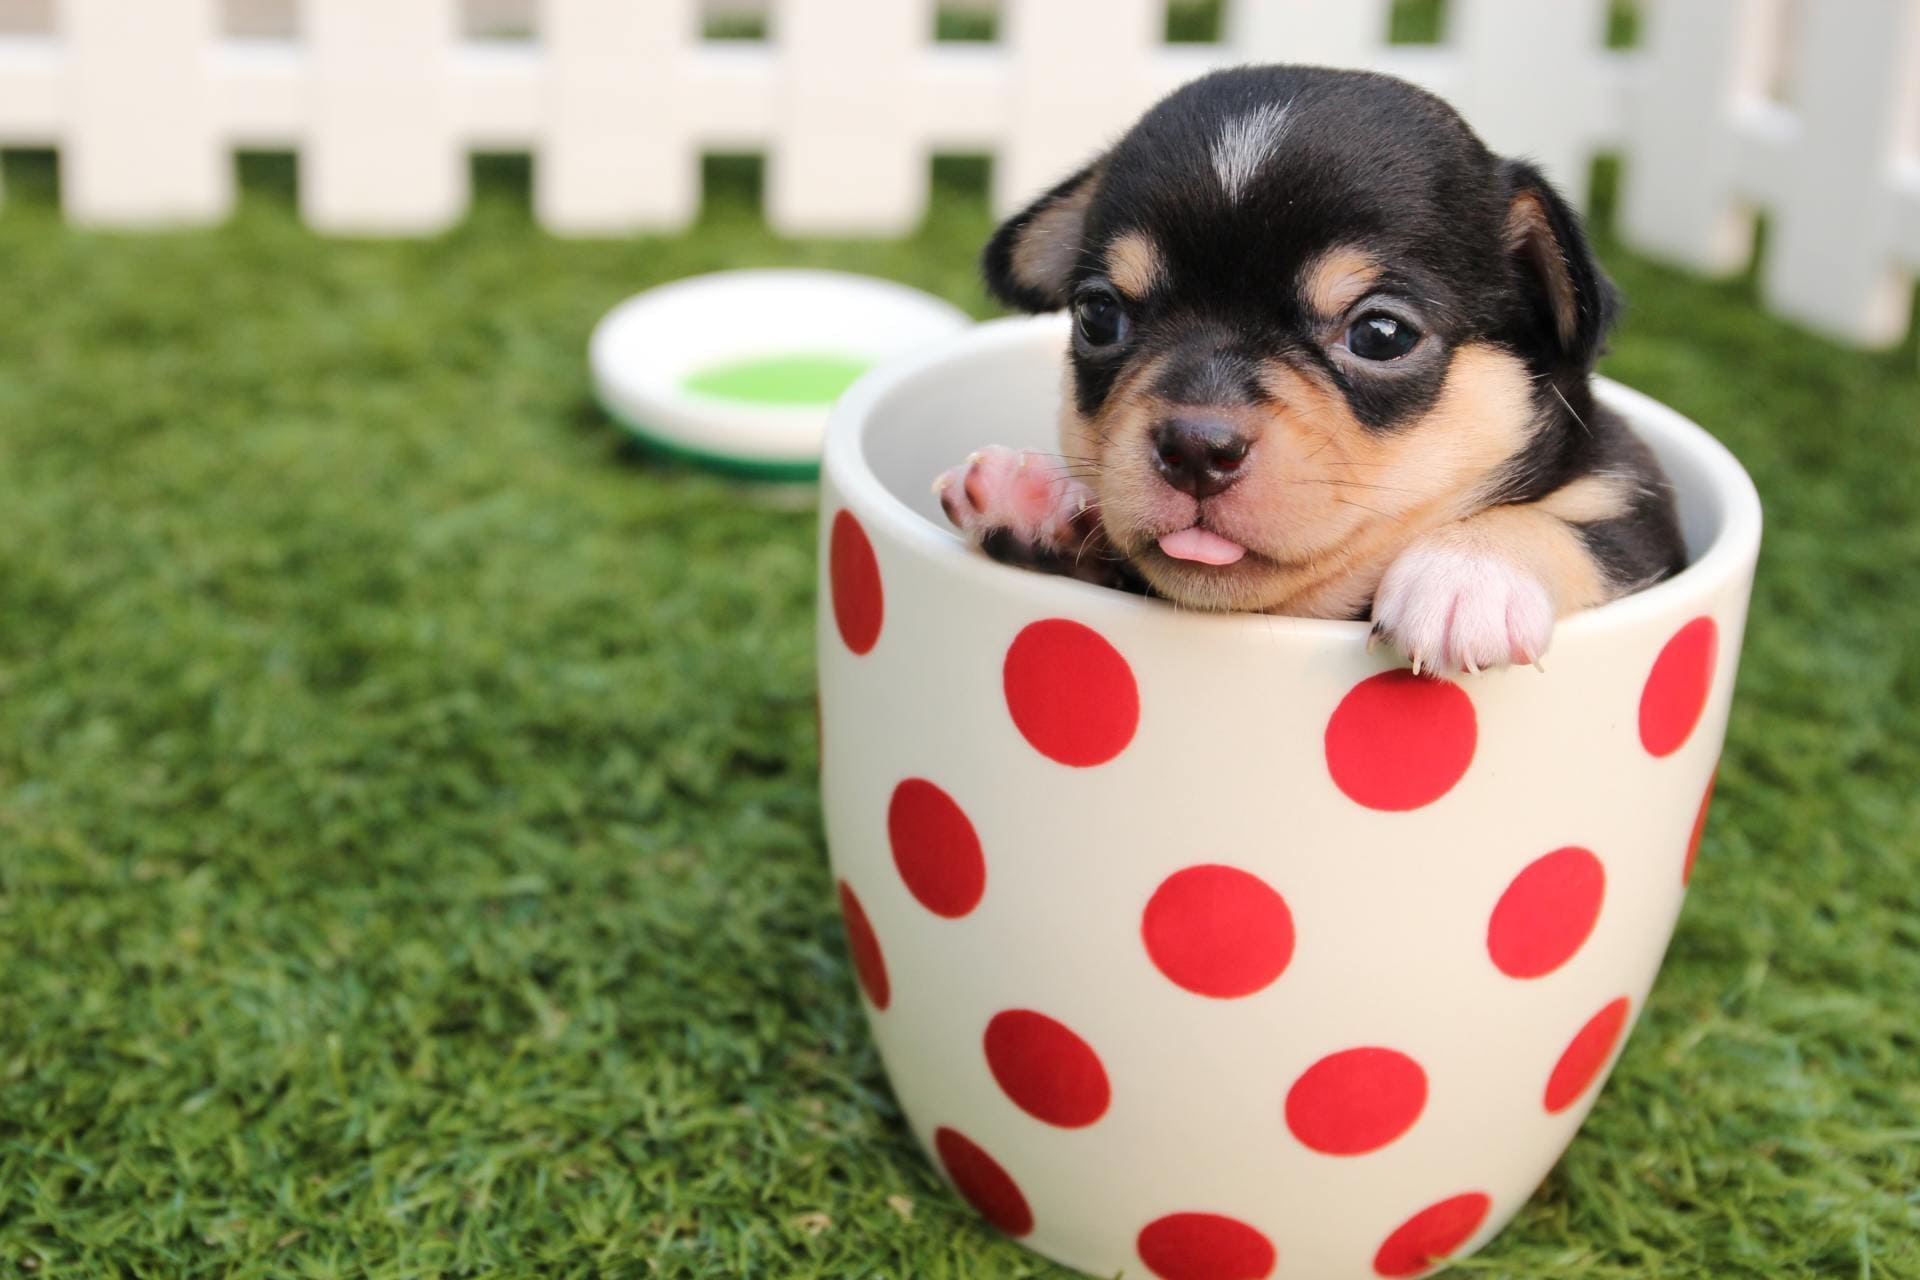 Baby Chihuahua sitting in a cup